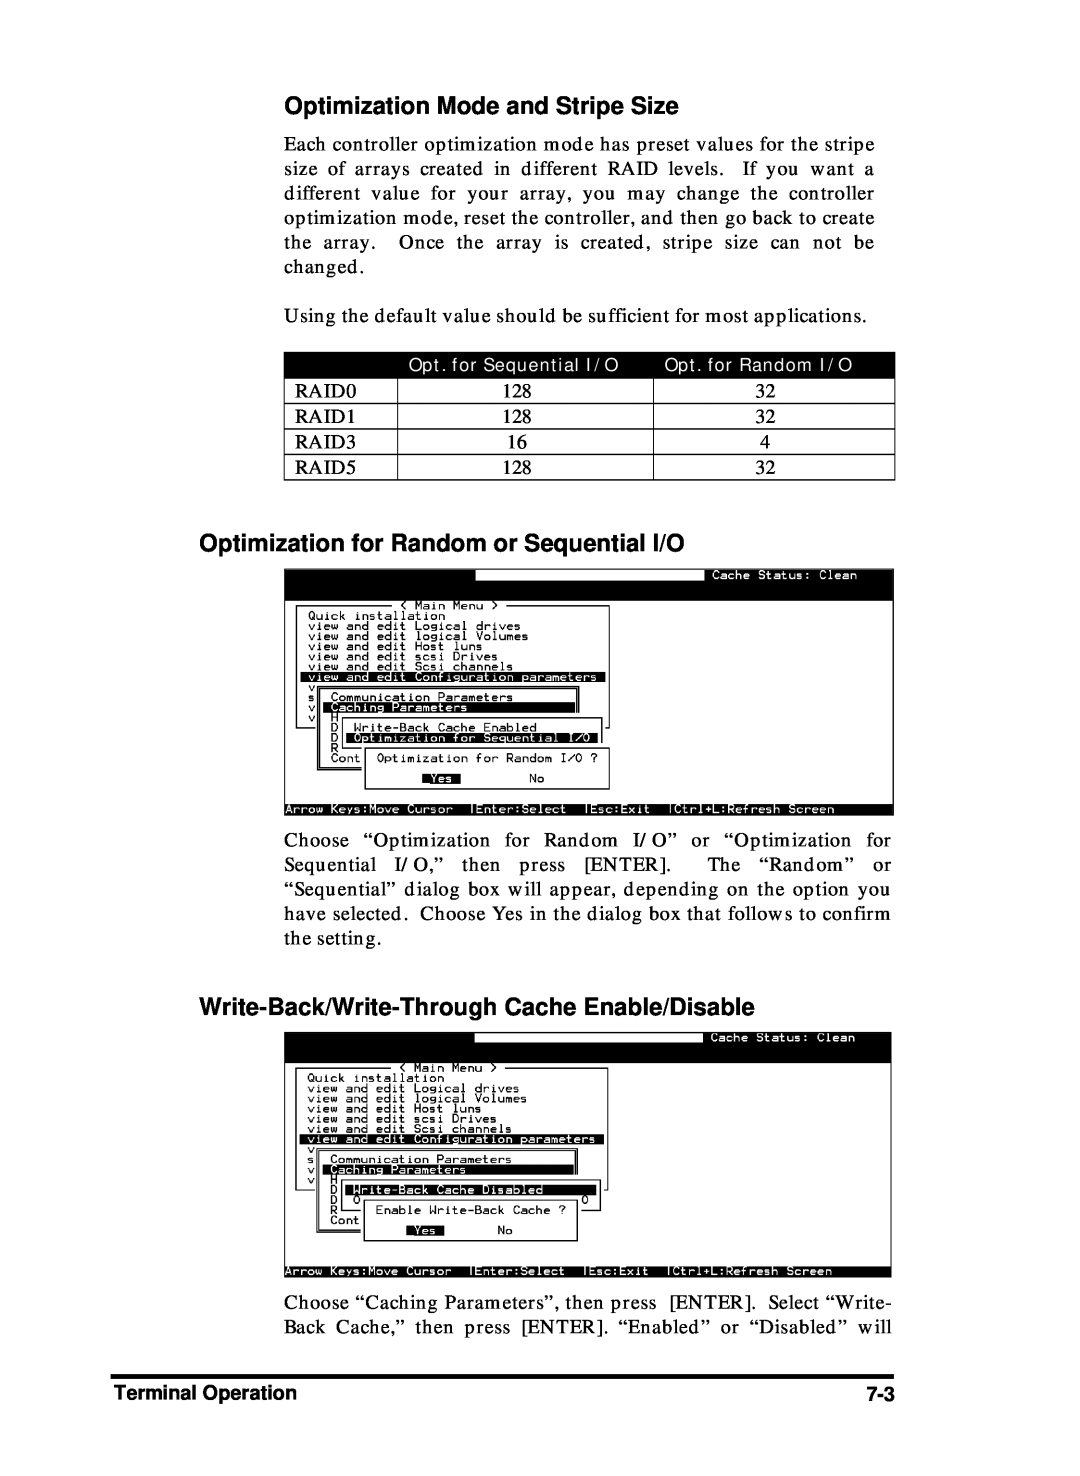 Compaq Infortrend manual Optimization Mode and Stripe Size, Optimization for Random or Sequential I/O, Terminal Operation 